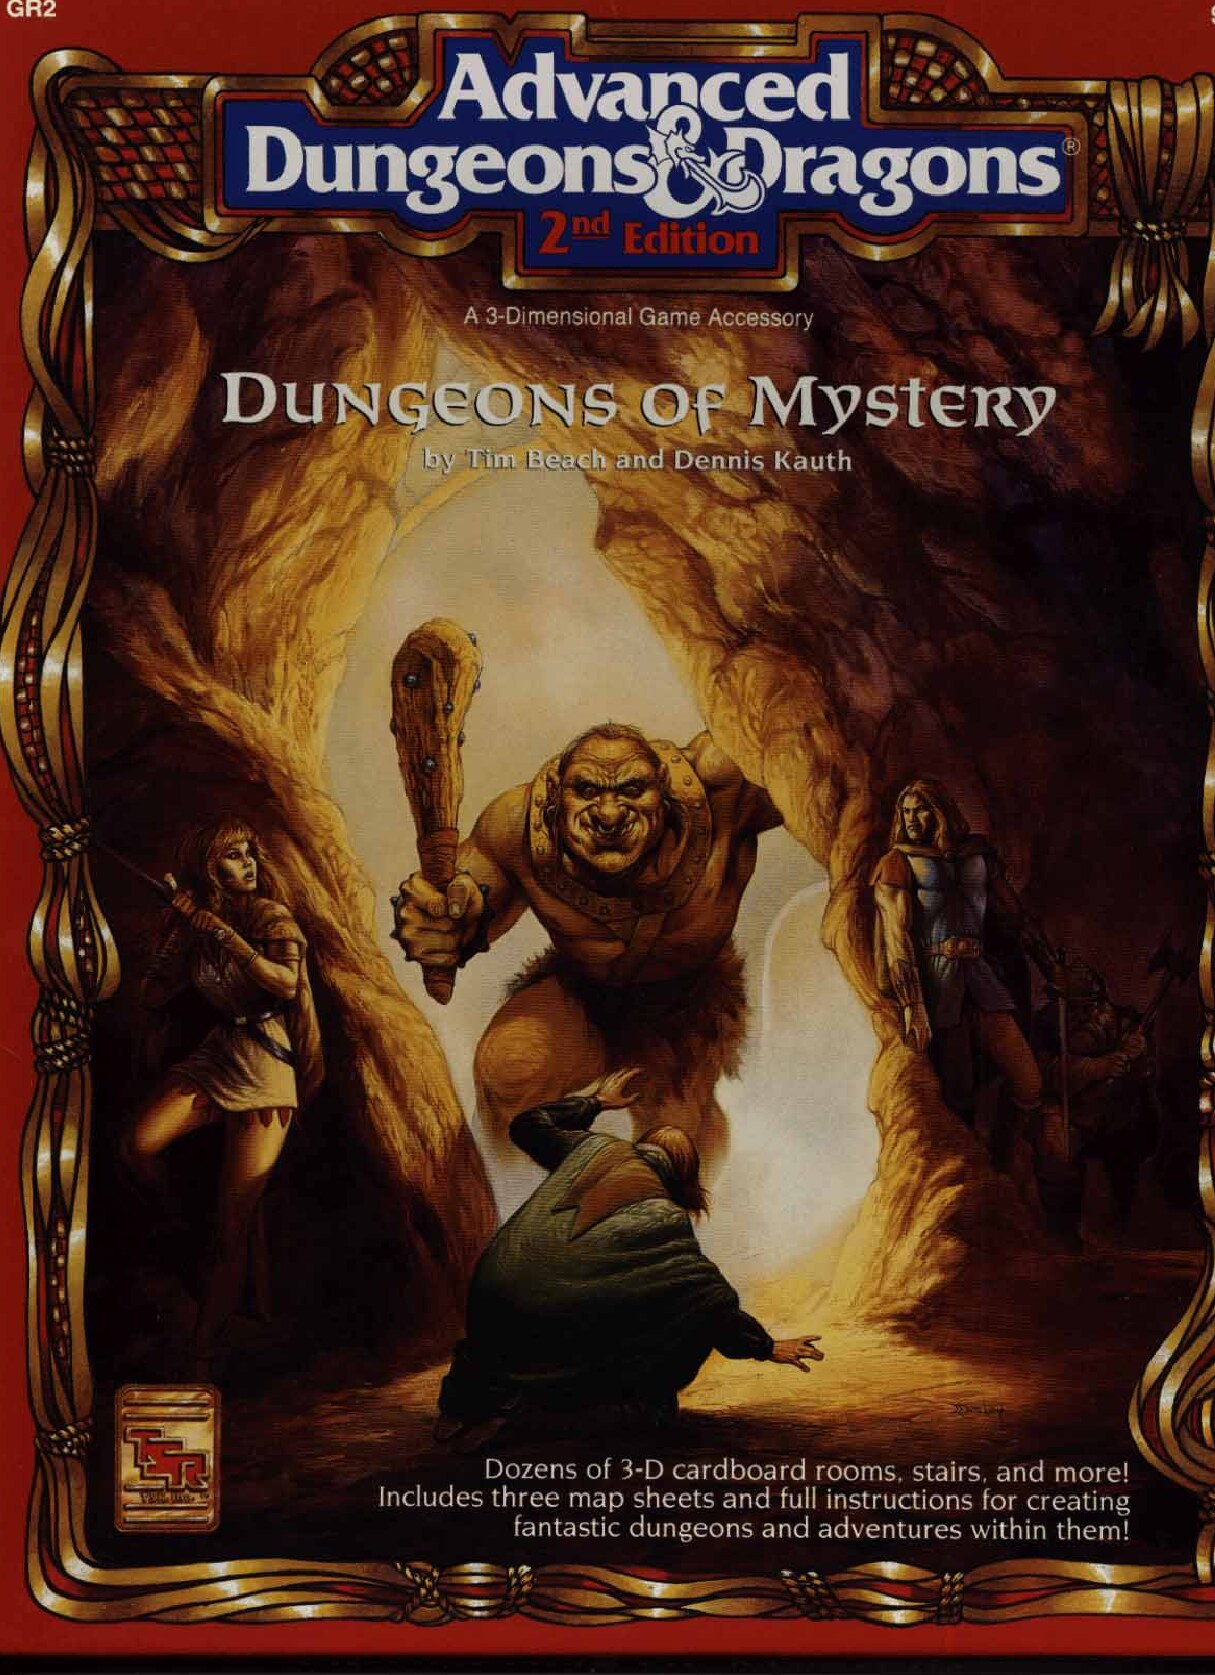 GR2 - Dungeons Of Mystery Fold-Ups (9365)